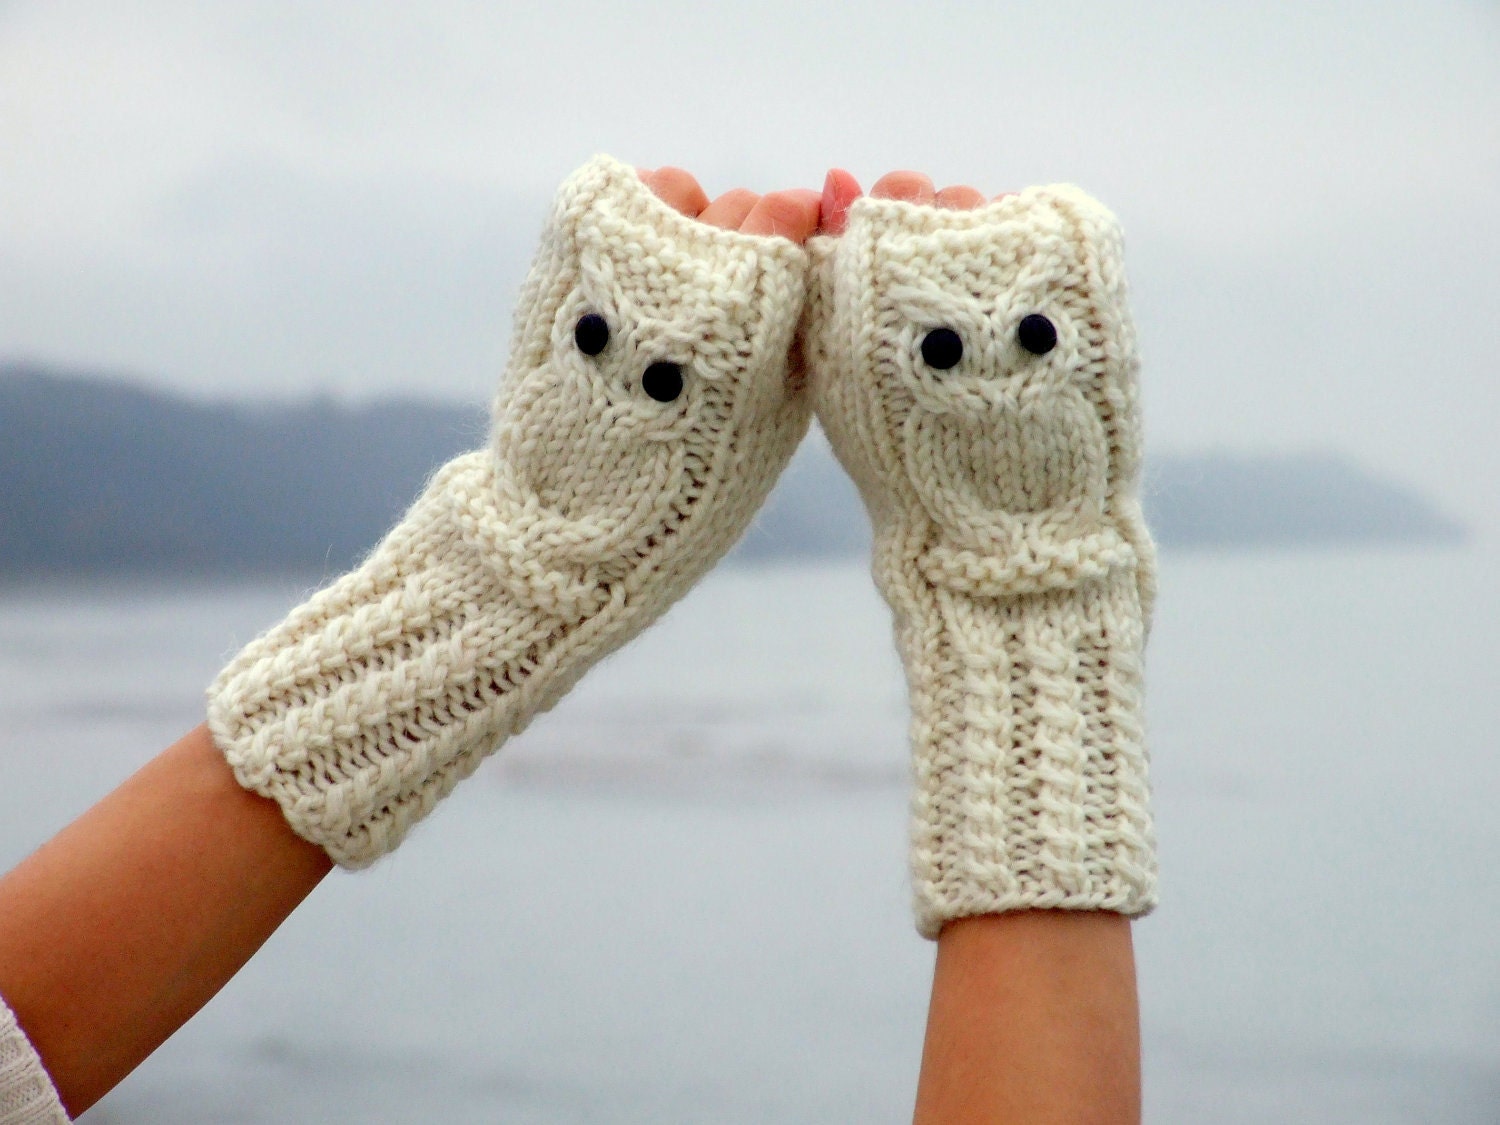 Hedwig owl fingerless mittens / gloves in white made of wool alpaca acrylic yarn blend